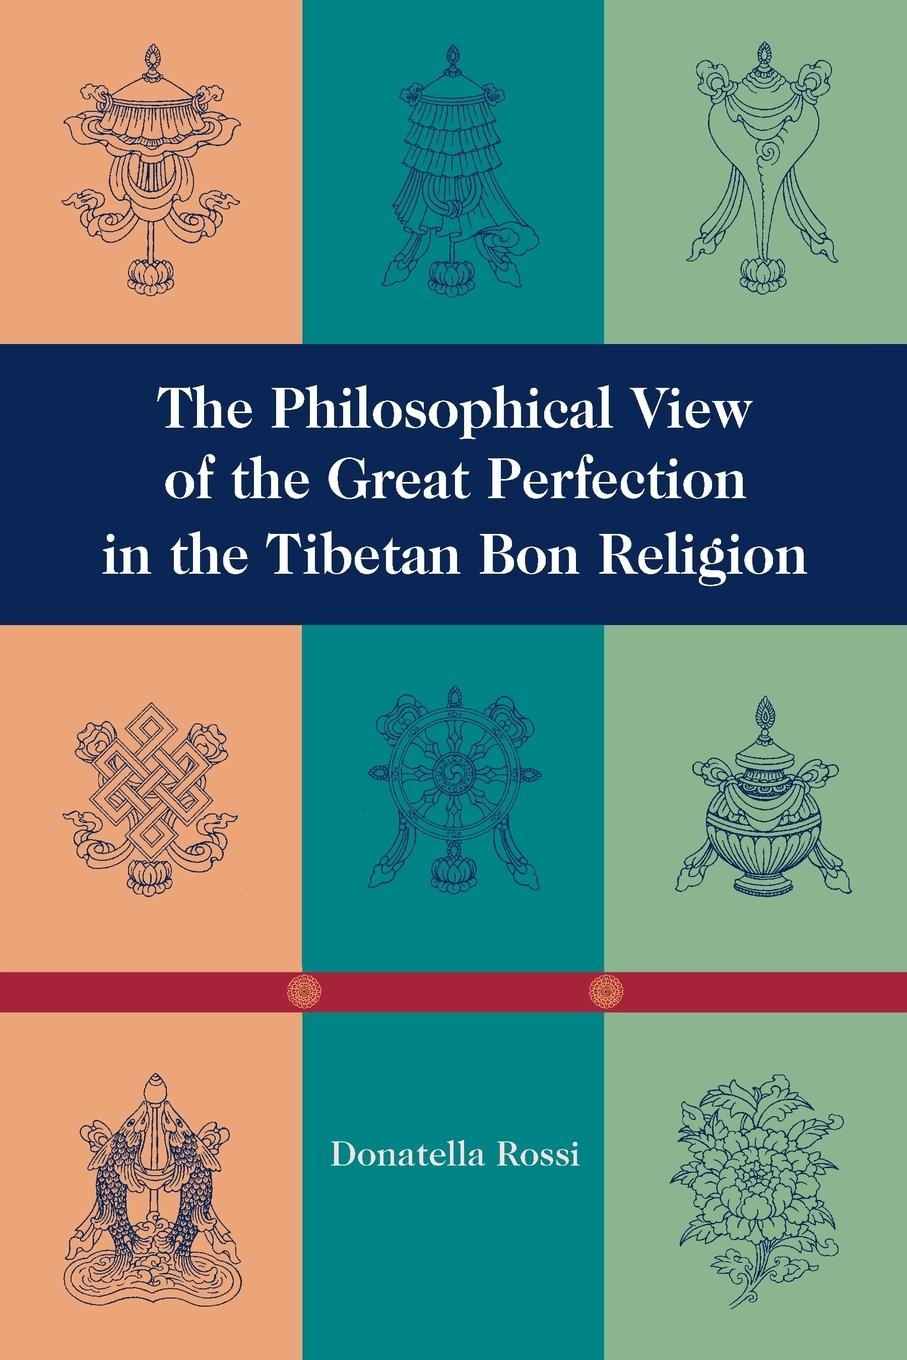 The Philosophical View of the Great Perfection in the Tibetan Bon Religion - Donatella Rossi